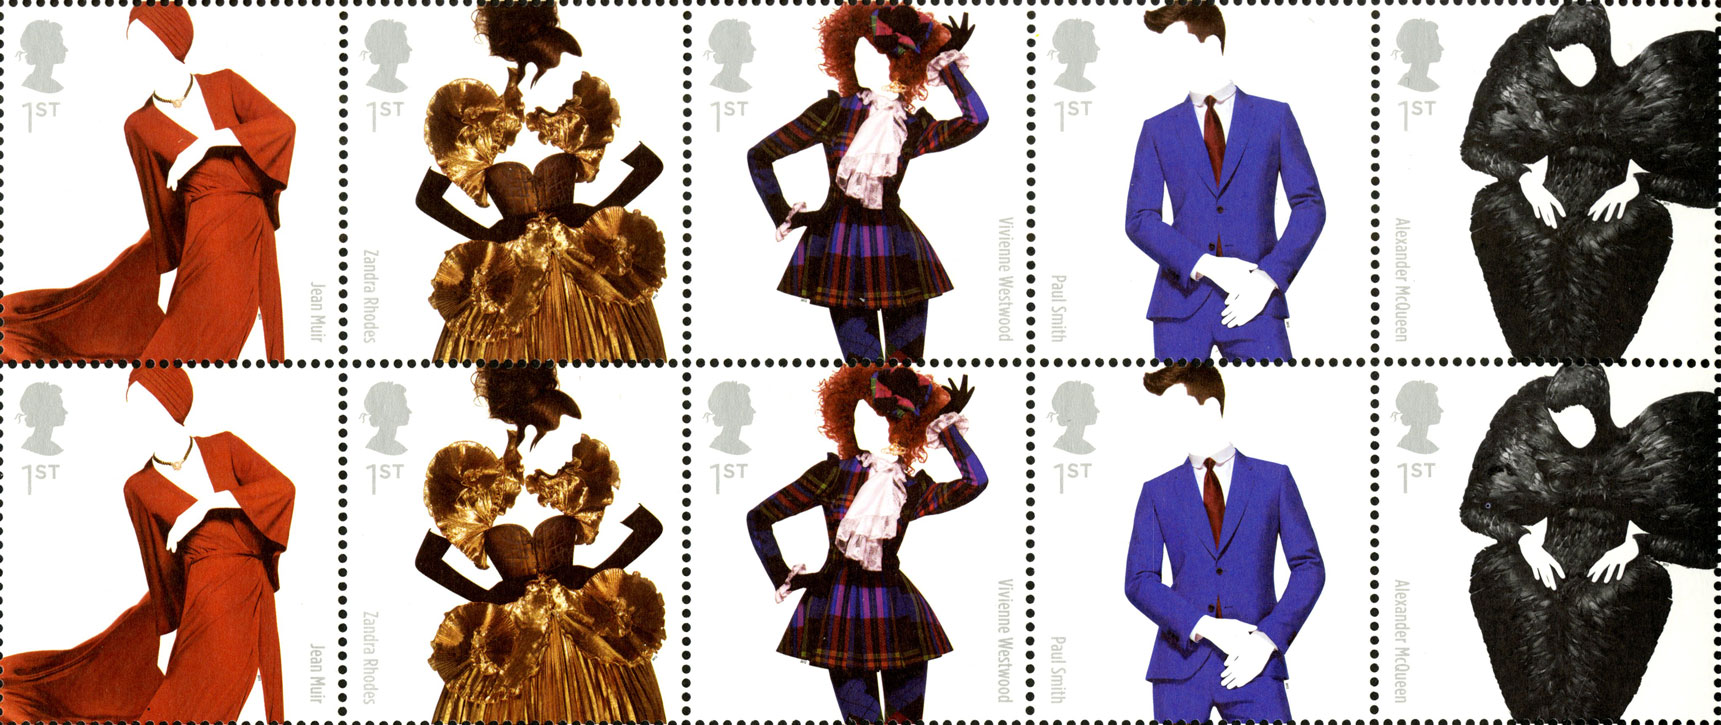 Partial sheet of stamps from the Great British Fashion issue with 5 different designs.